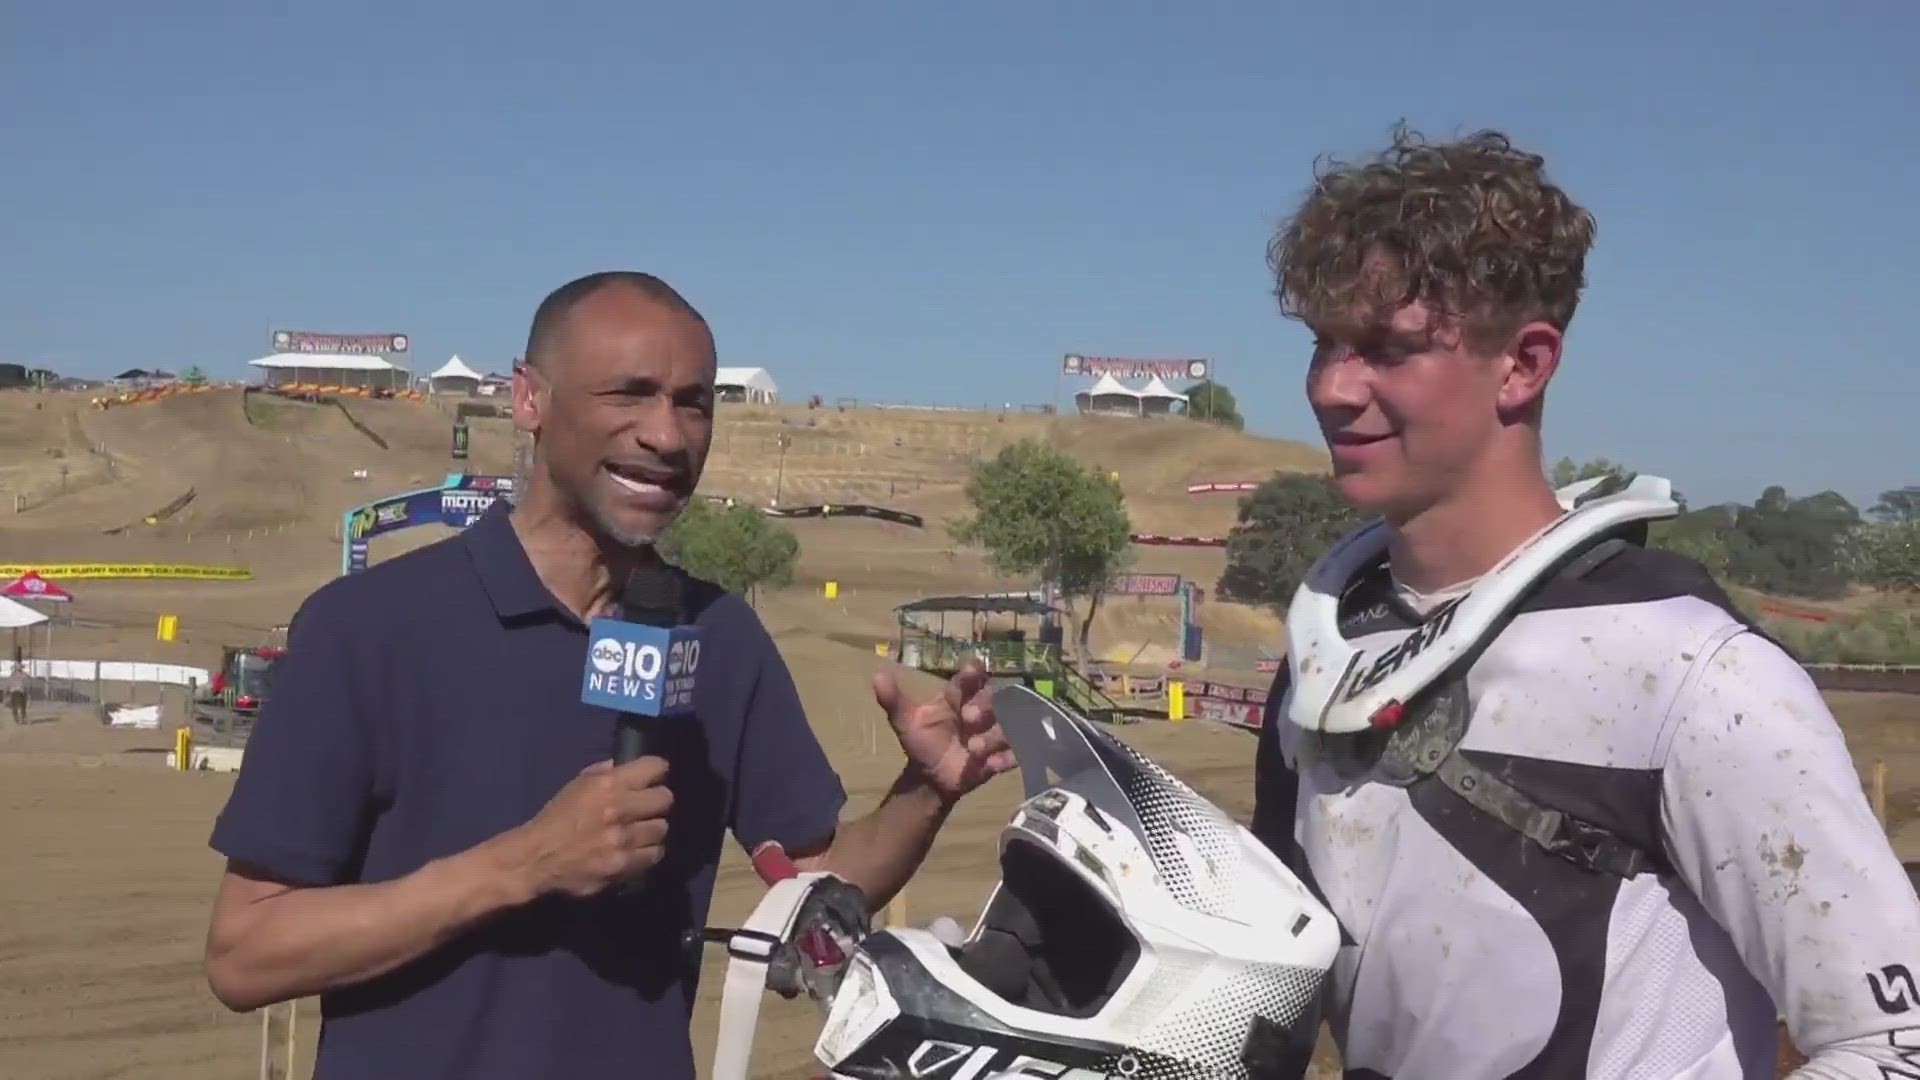 Racers from all over the country are coming down to Rancho Cordova for the 54th annual Hangtown Motocross Classic.